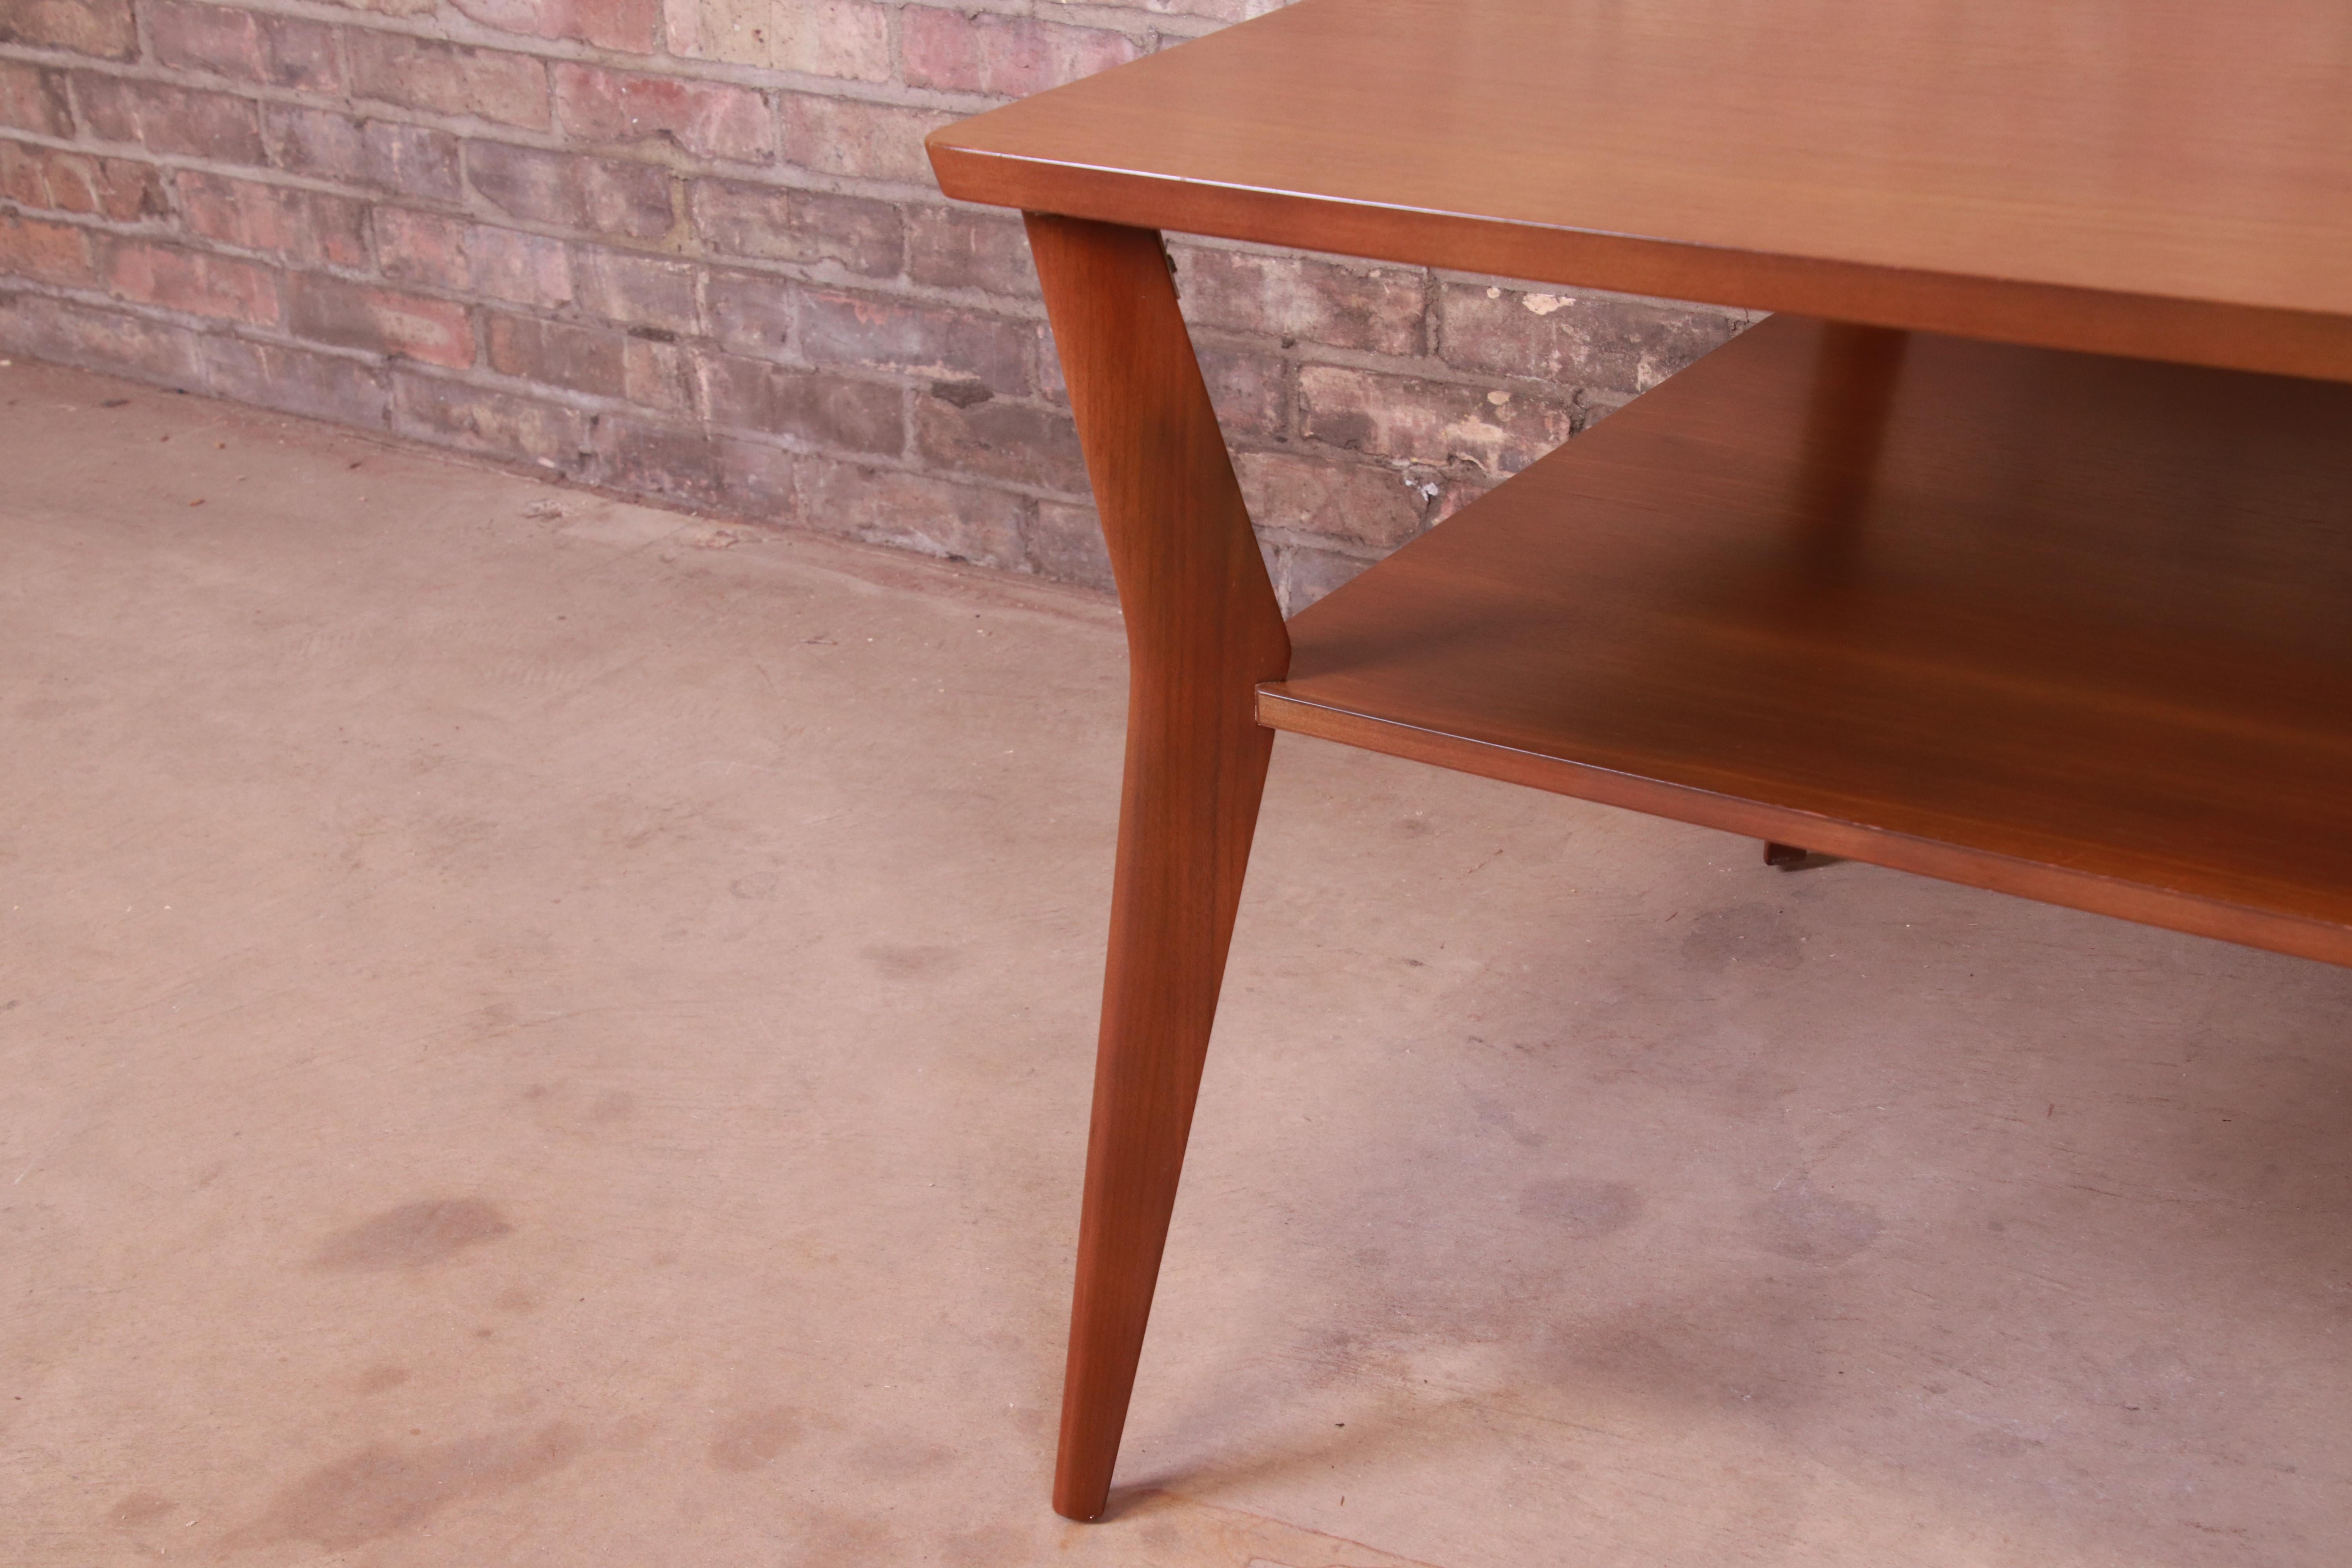 20th Century Mid-Century Modern Walnut Cocktail Table or Occasional Side Table by Mersman